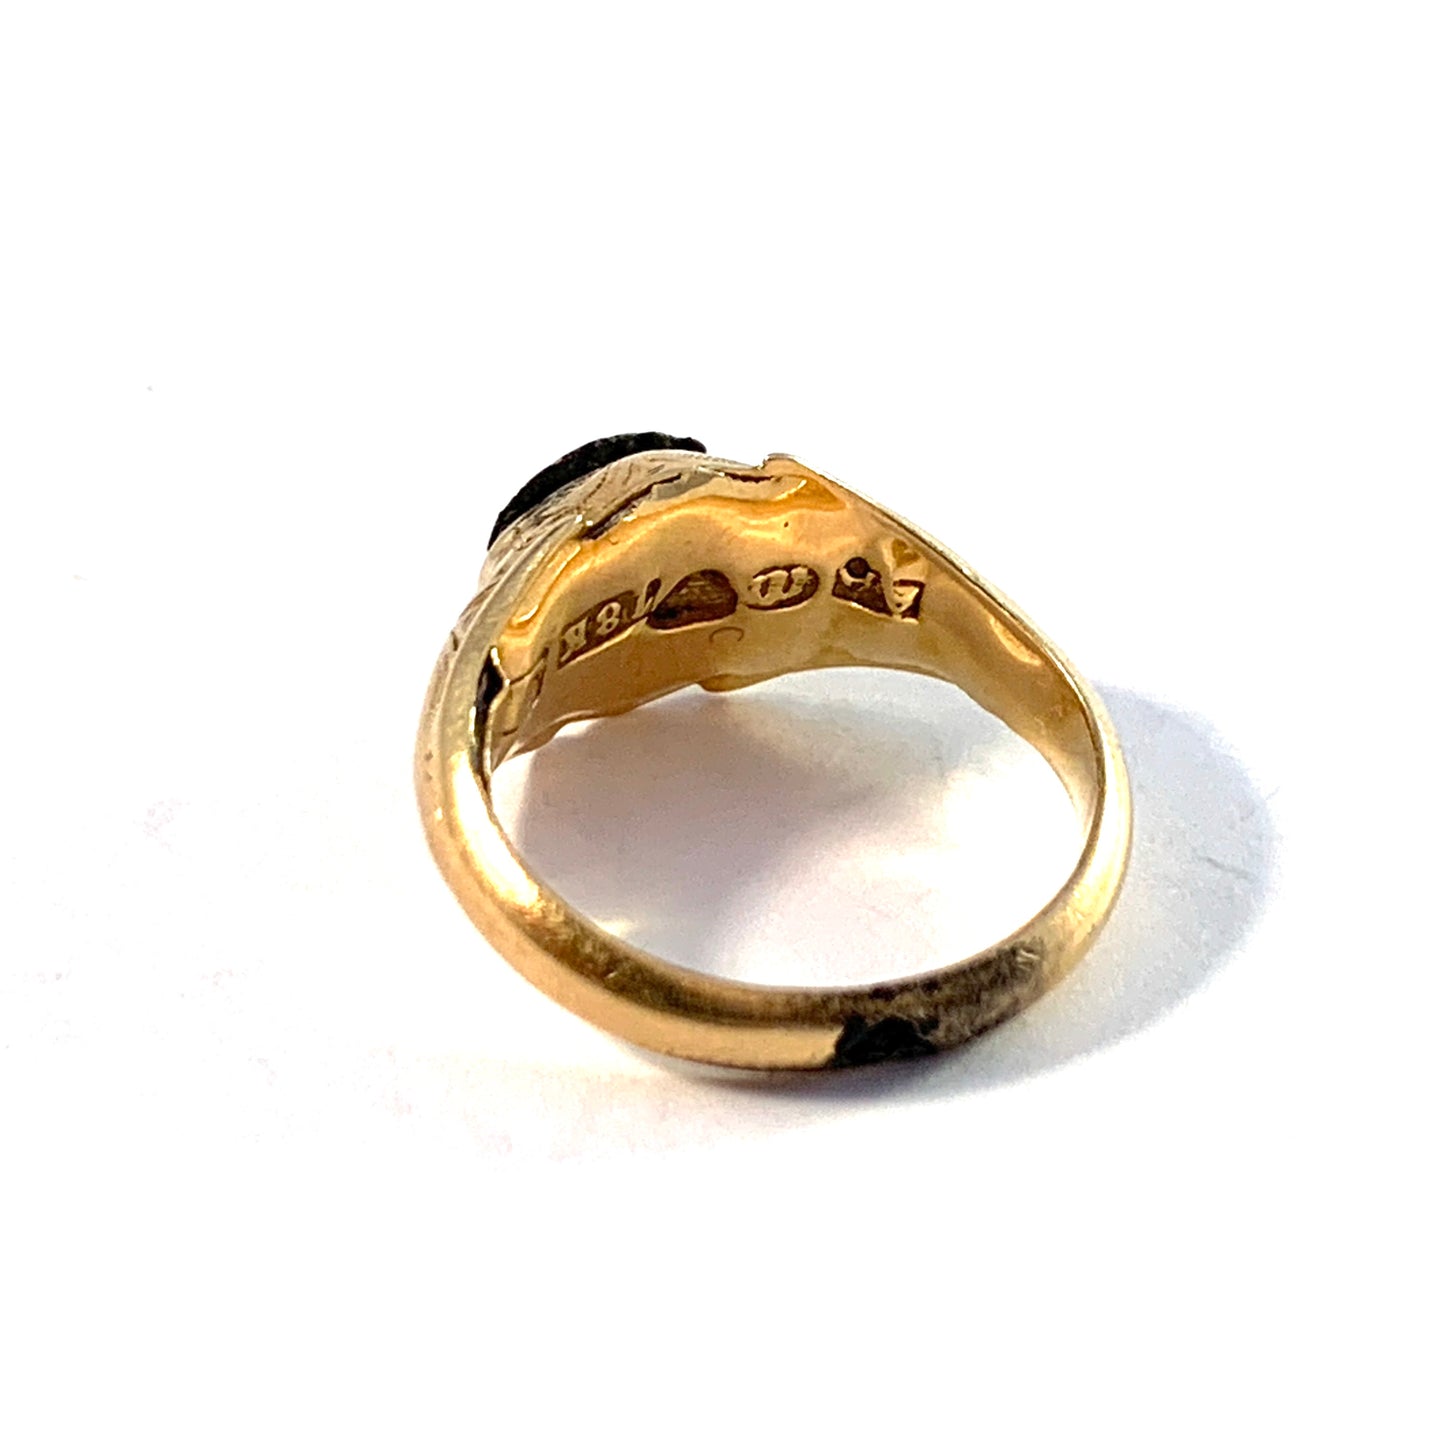 Sweden mid 1800s. Antique 18k Gold Faith, Hope and Love Ring.